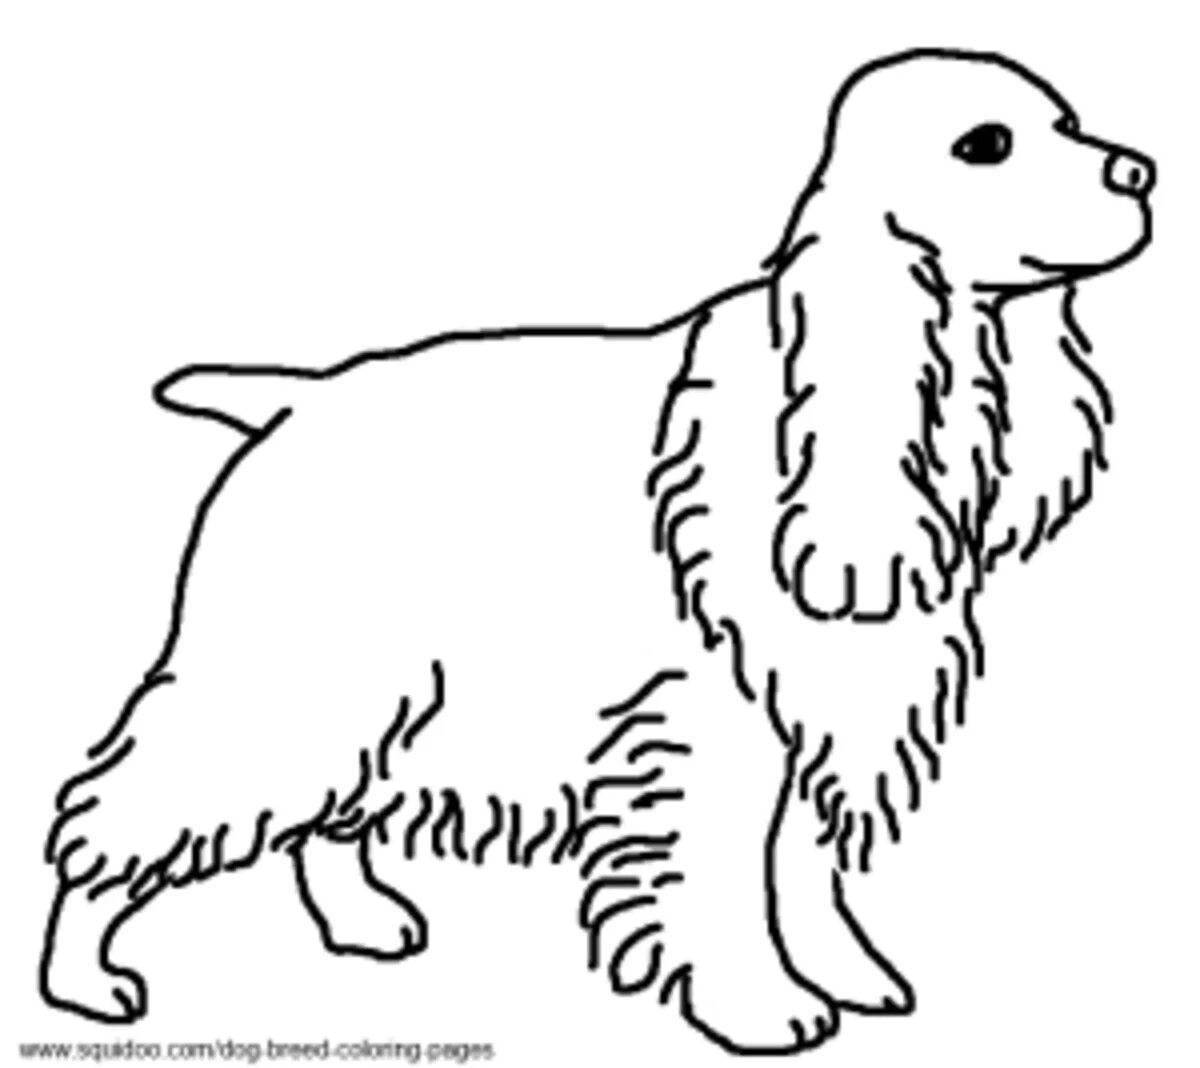 Coloring page cute spaniel dog